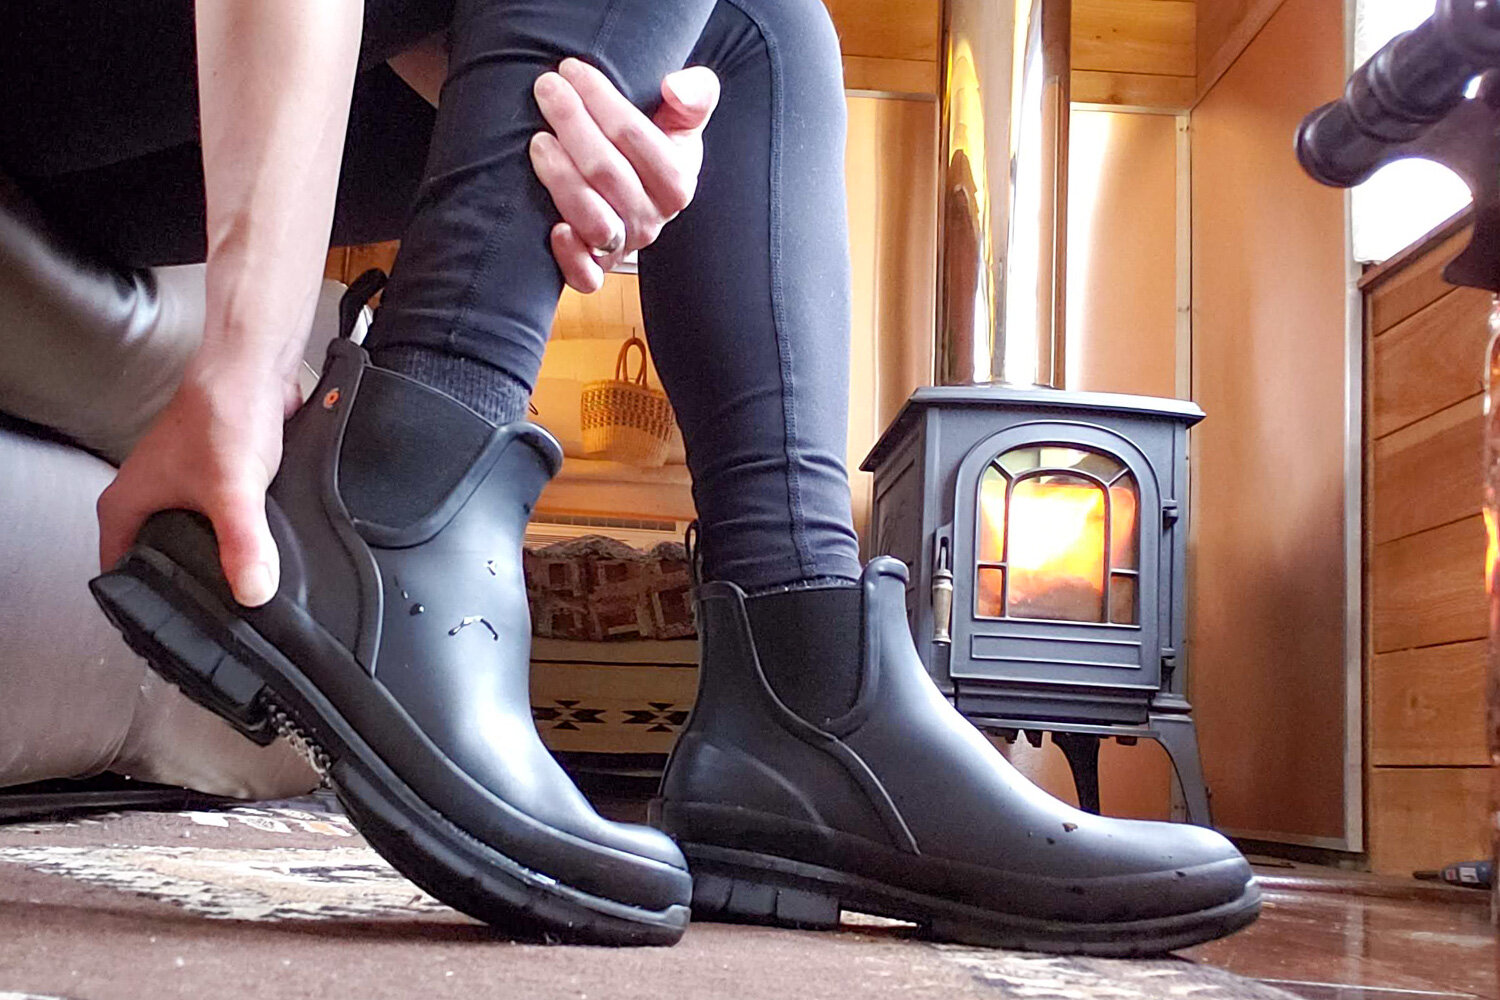 Slip-on boots Like the Bogs Amanda Plush are convenient for the indoor-outdoor lifestyle.